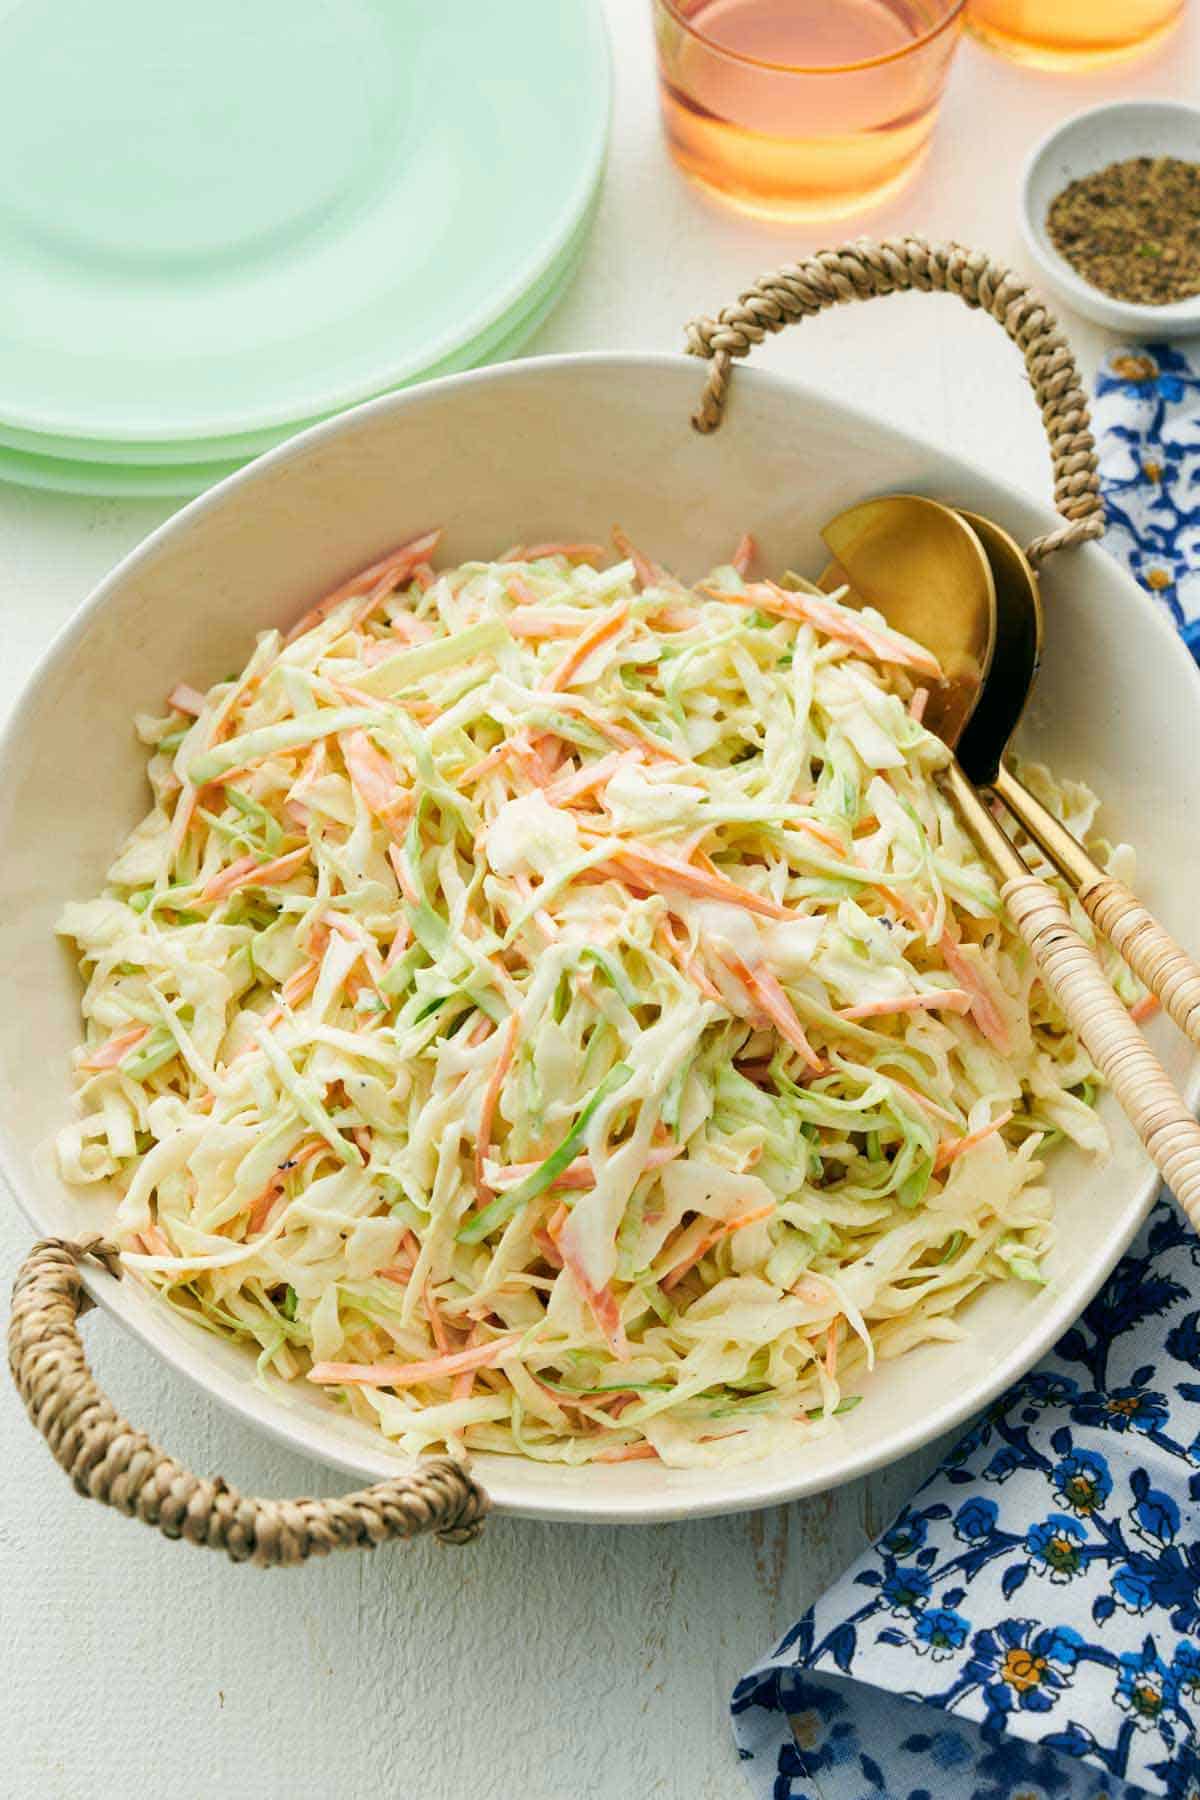 Overhead view of a serving plate of coleslaw with serving spoons tucked in.